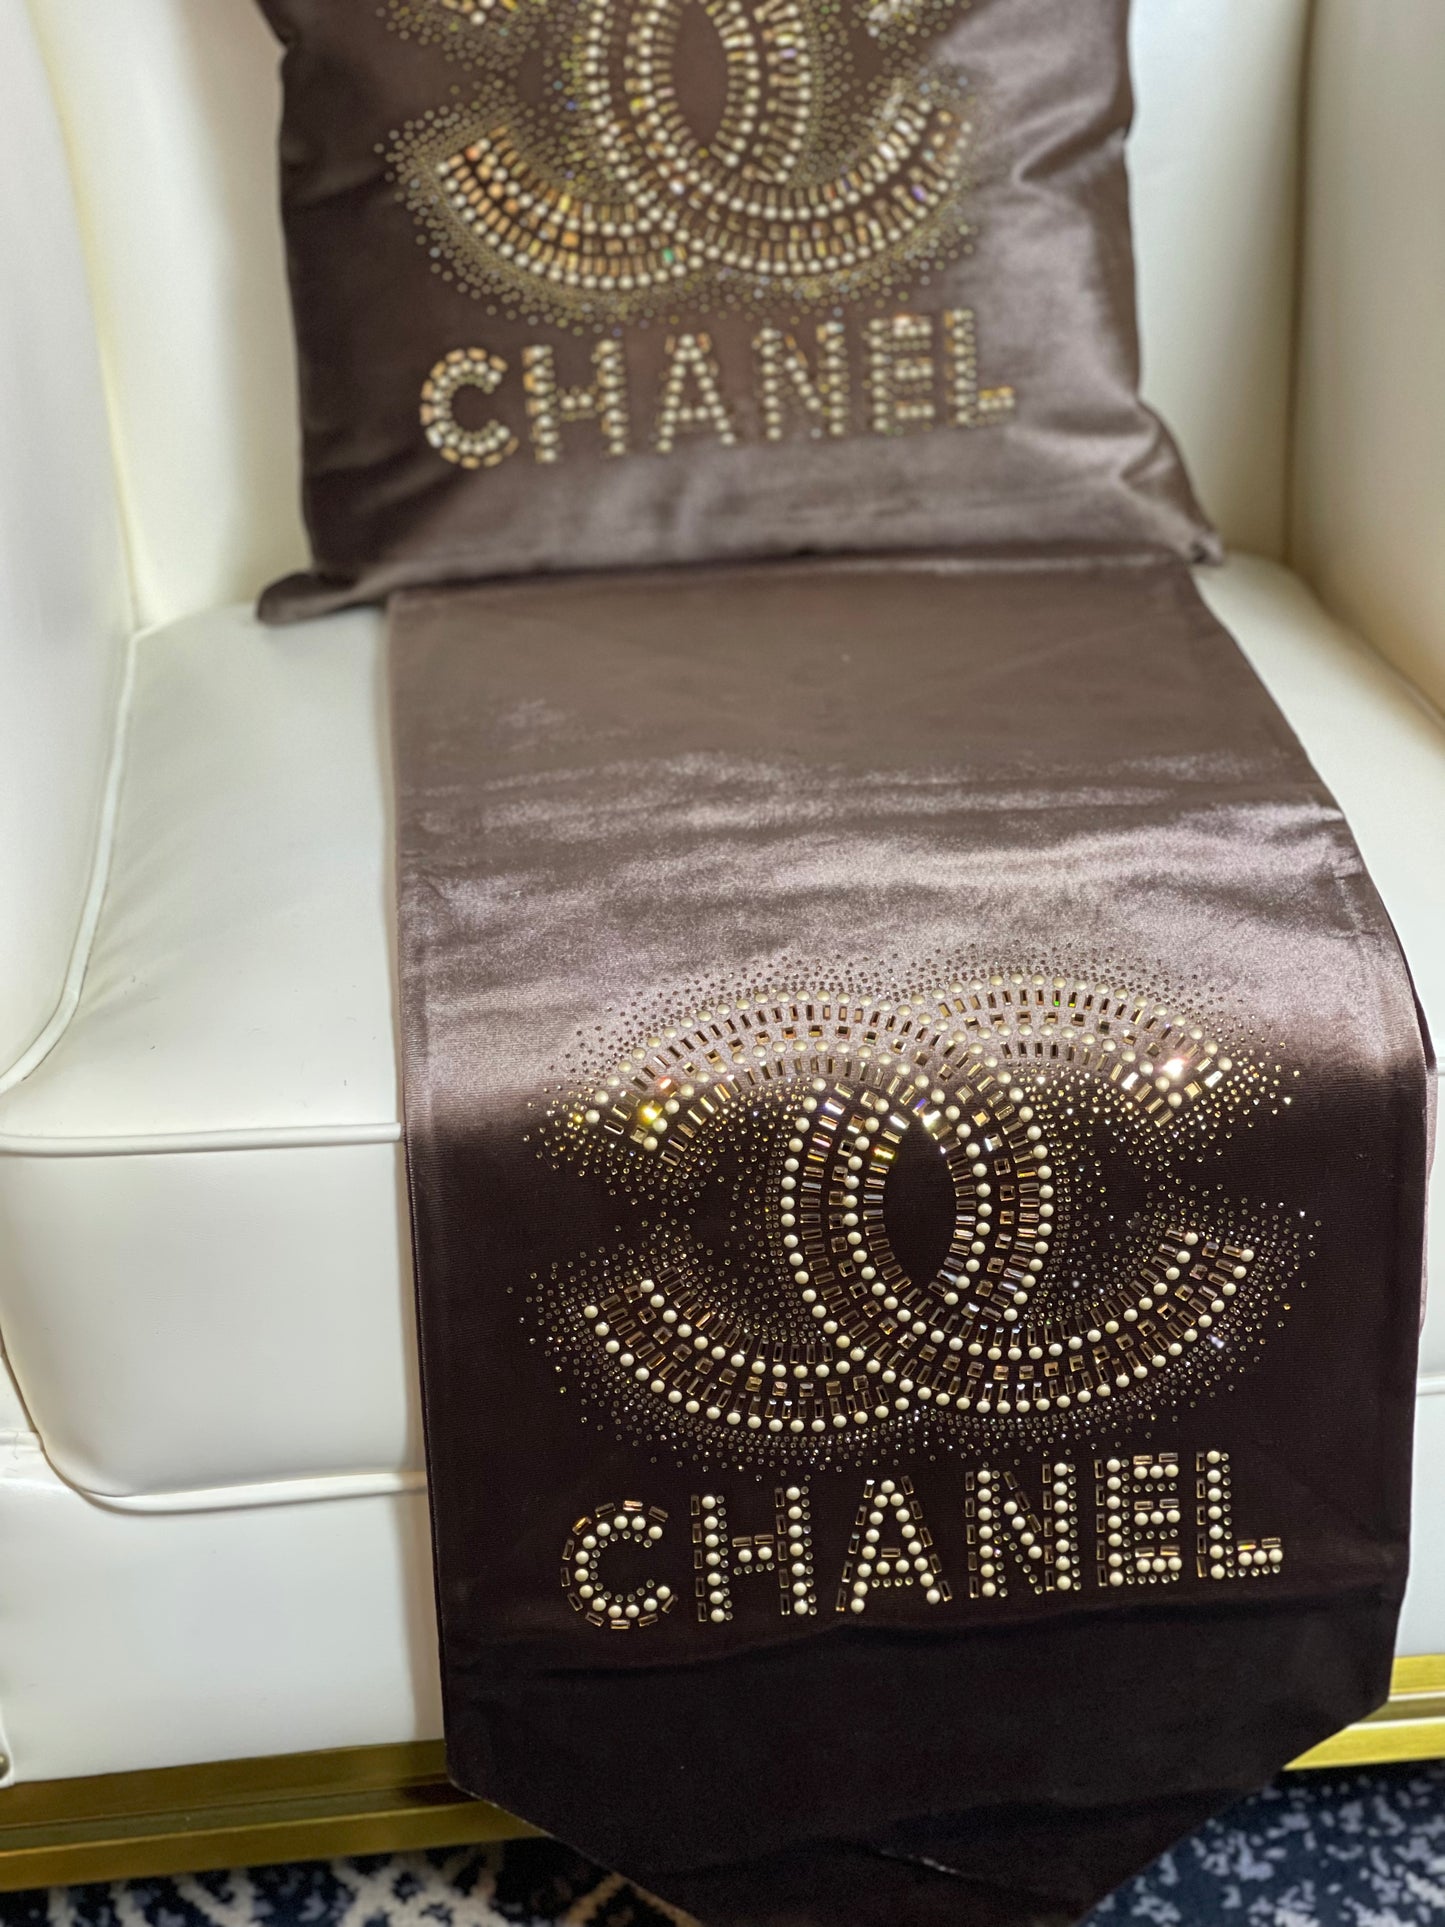 Brown Chanel Throw Pillow